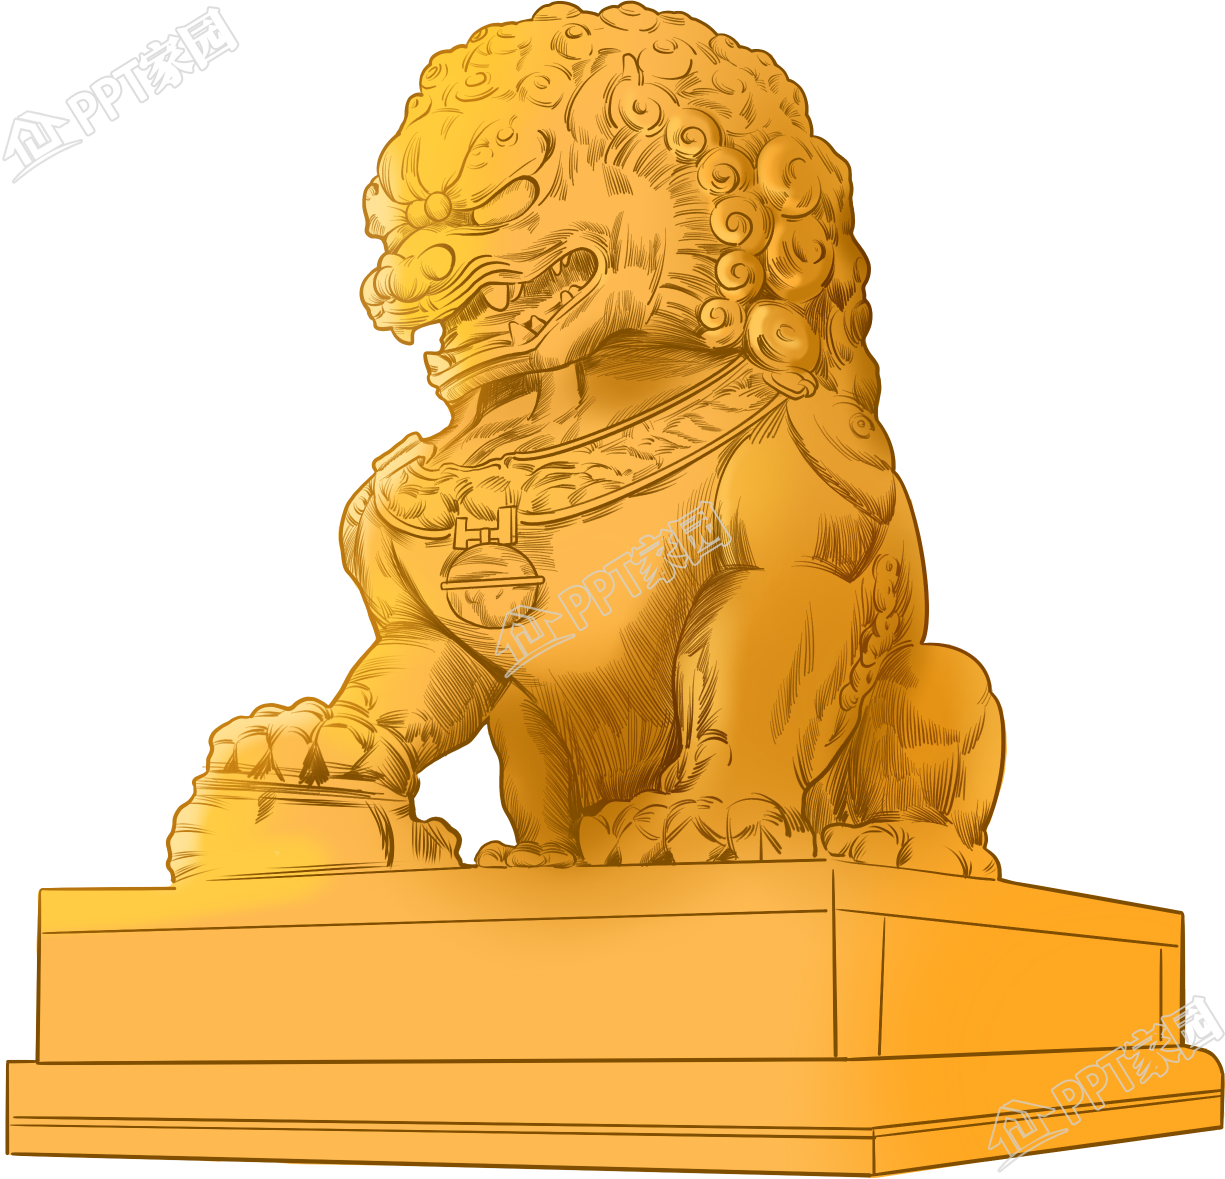 Hand-painted golden stone lion material download recommended